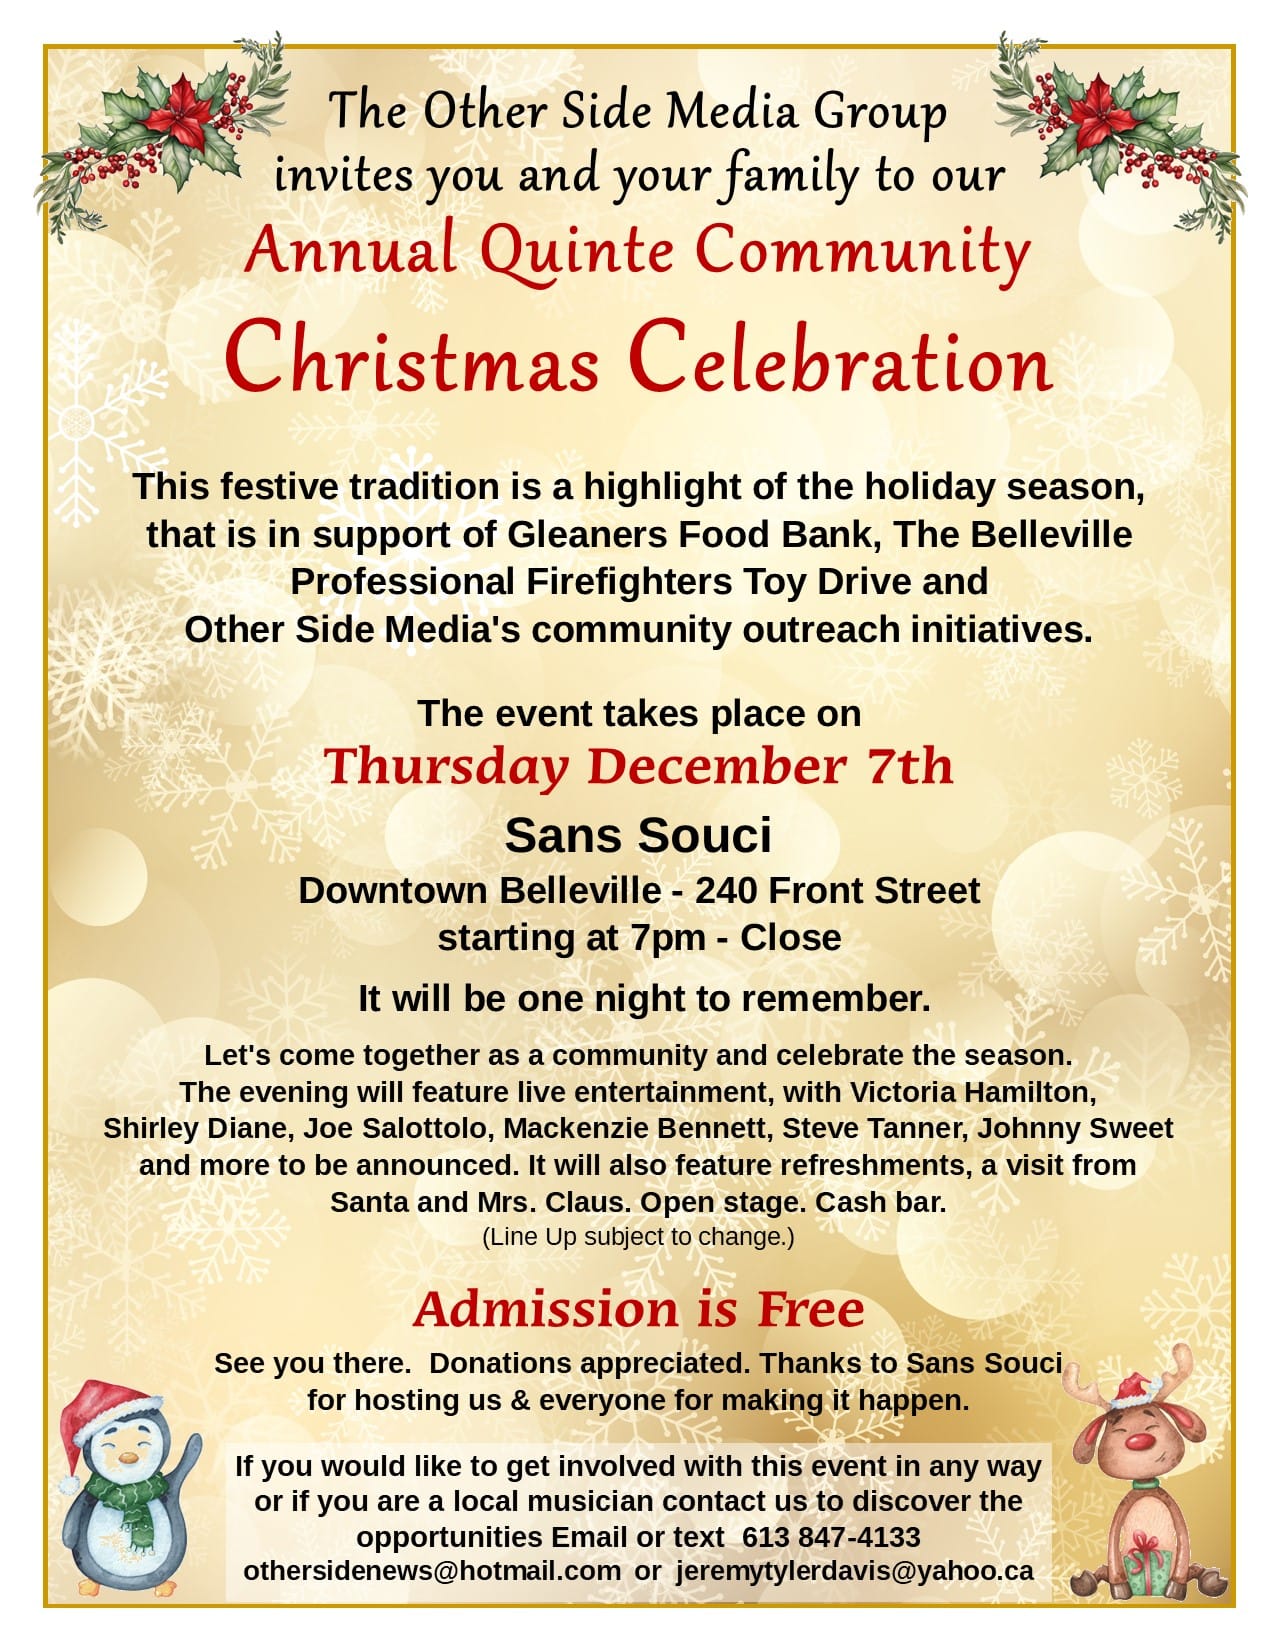 Poster with details of the event reads "The Other Side Media Group invites you and your family to our Annual Quinte Community Christmas Celebration This festive tradition is a highlight of the holiday season, that is in support of Gleaners Food Bank, The Belleville Professional Firefighters Toy Drive and Other Side Media's community outreach initiatives. The event takes place on Thursday December 7th Sans Souci Downtown Belleville - 240 Front Street starting at 7pm - Close It will be one night to remember. Let's come together as a community and celebrate the season. The evening will feature live entertainment, with Victoria Hamilton, Shirley Diane, Joe Salottolo, Mackenzie Bennett, Steve Tanner, Johnny Sweet and more to be announced. It will also feature refreshments, a visit from Santa and Mrs. Claus. Open stage. Cash bar. (Line Up subject to change.) Admission is Free See you there. Donations appreciated. Thanks to Sans Souci for hosting us & everyone for making it happen. If you would like to get involved with this event in any way or if you are a local musician contact us to discover the opportunities Email or text 613 847-4133 othersidenews@hotmail.com or jeremytylerdavis@yahoo.ca"